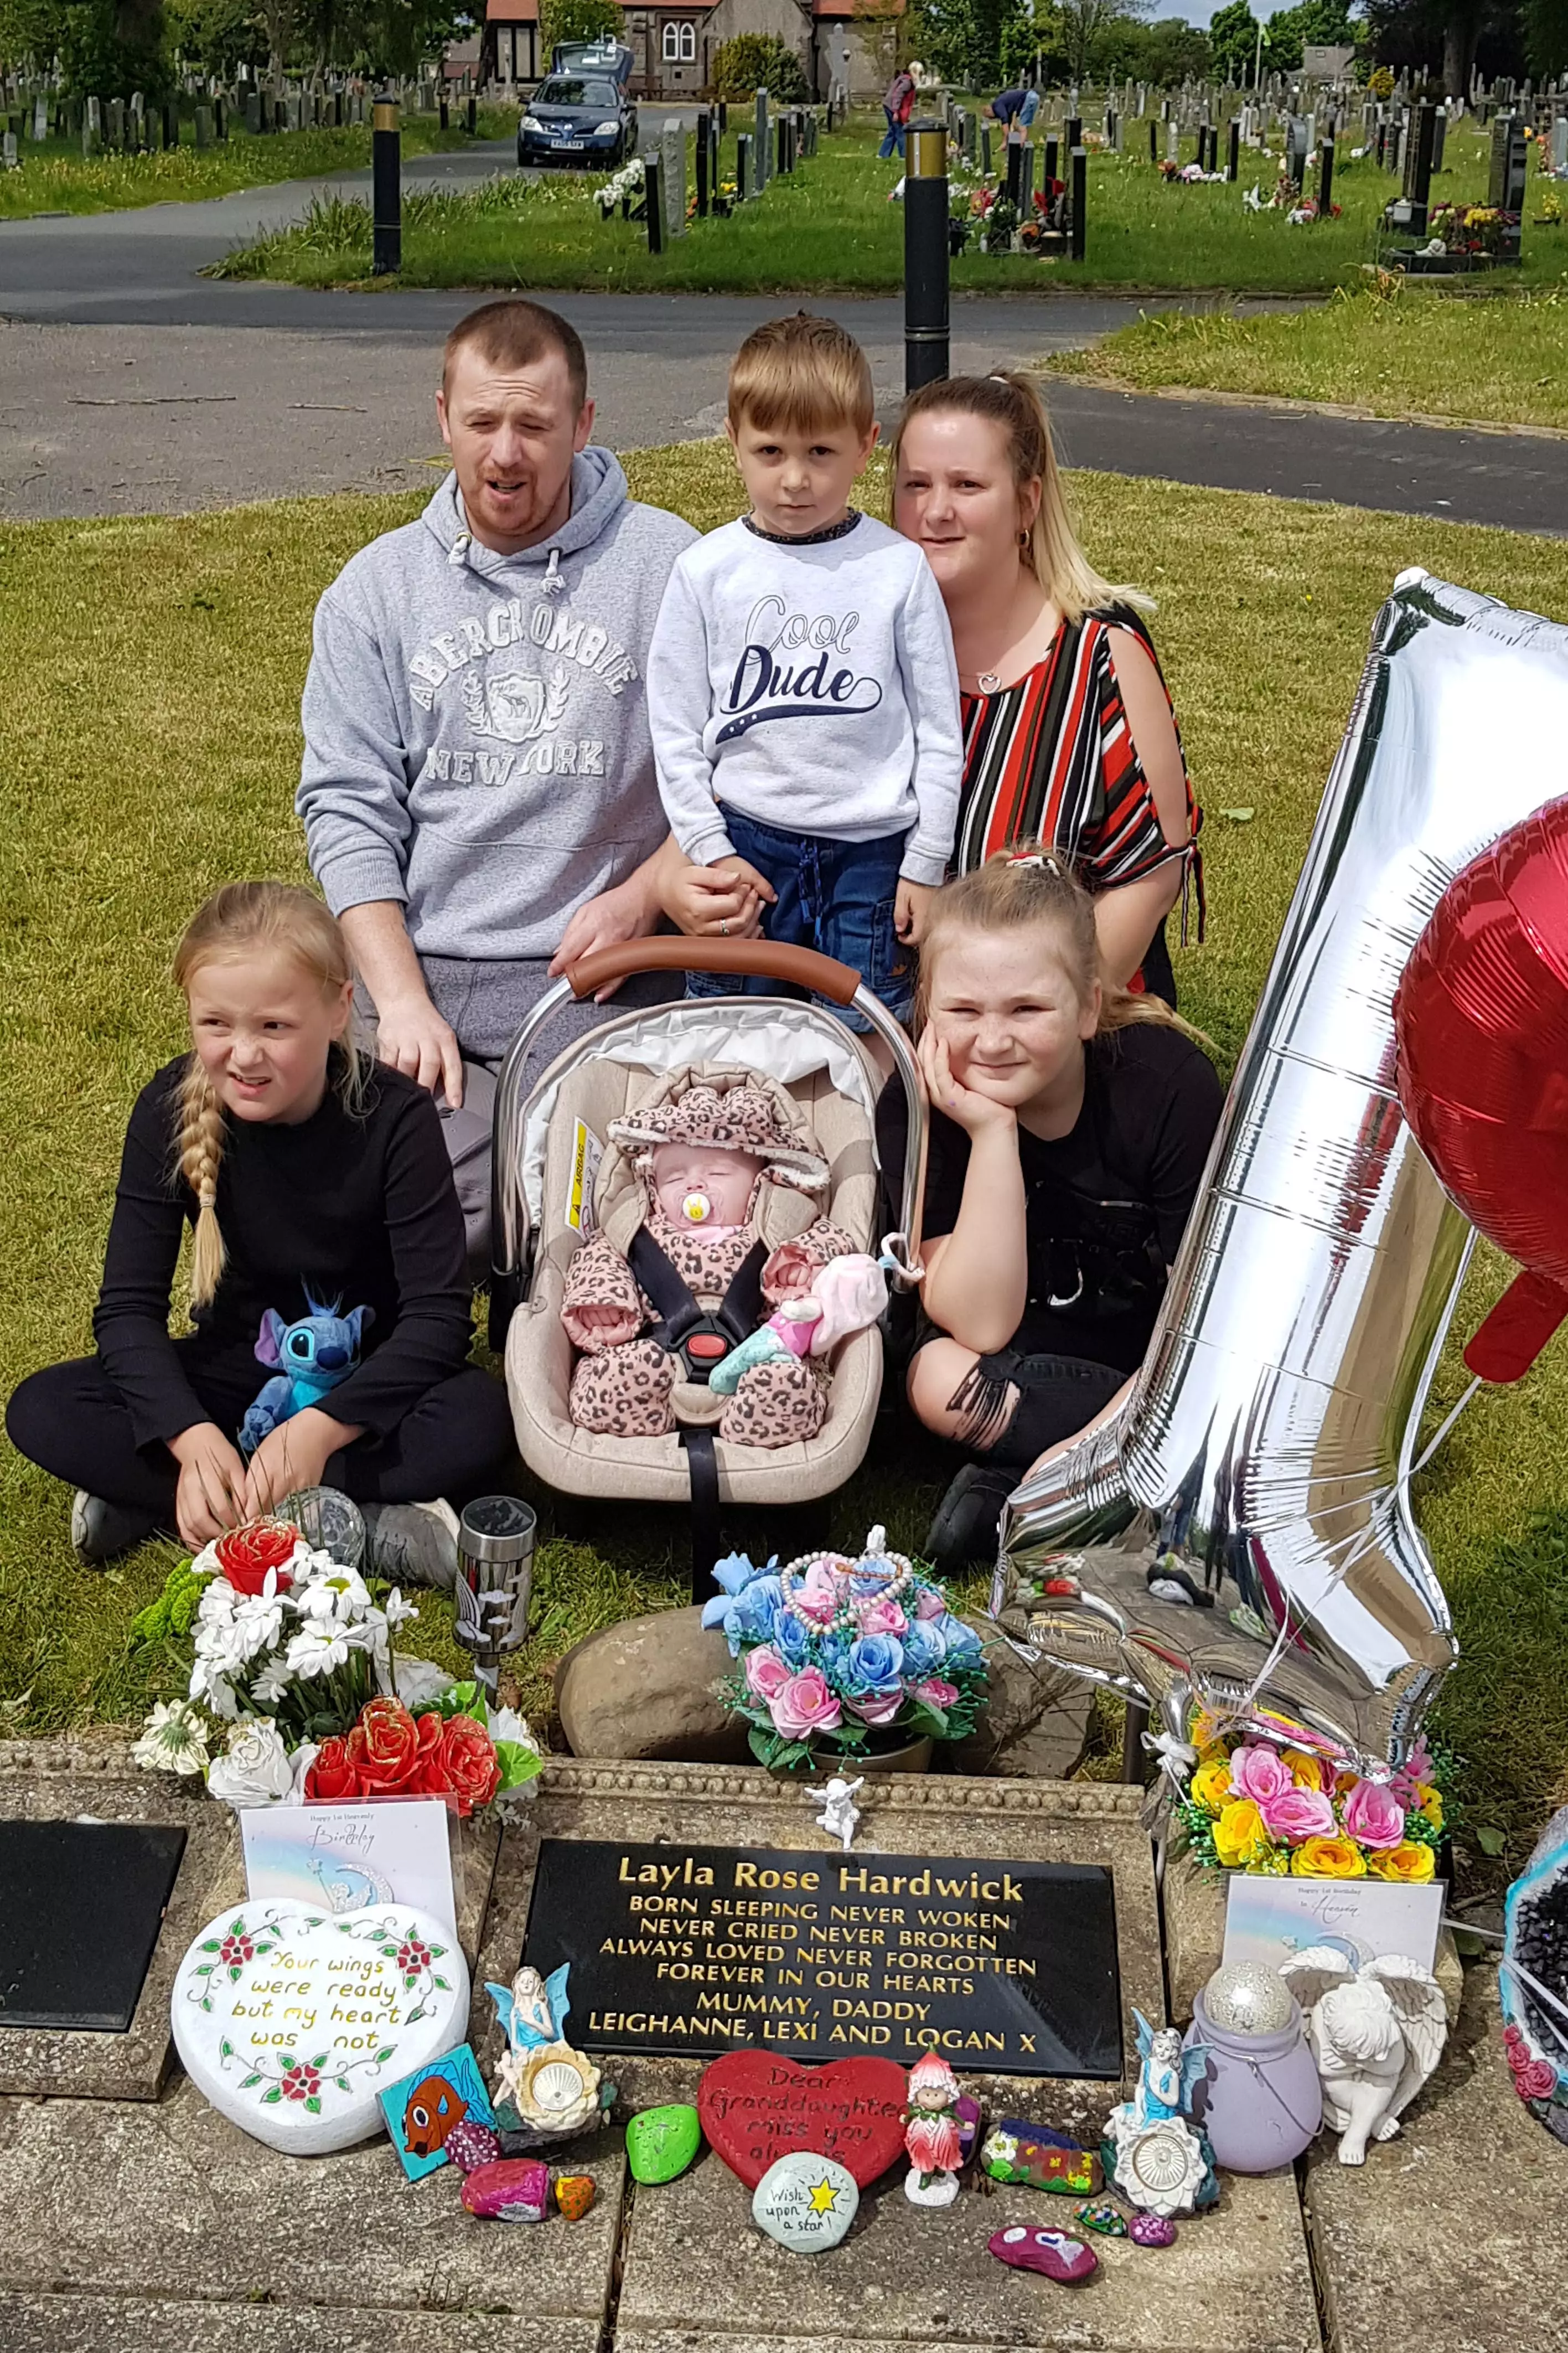 The family had been visiting the grave of their daughter Layla, who was sadly stillborn last year (